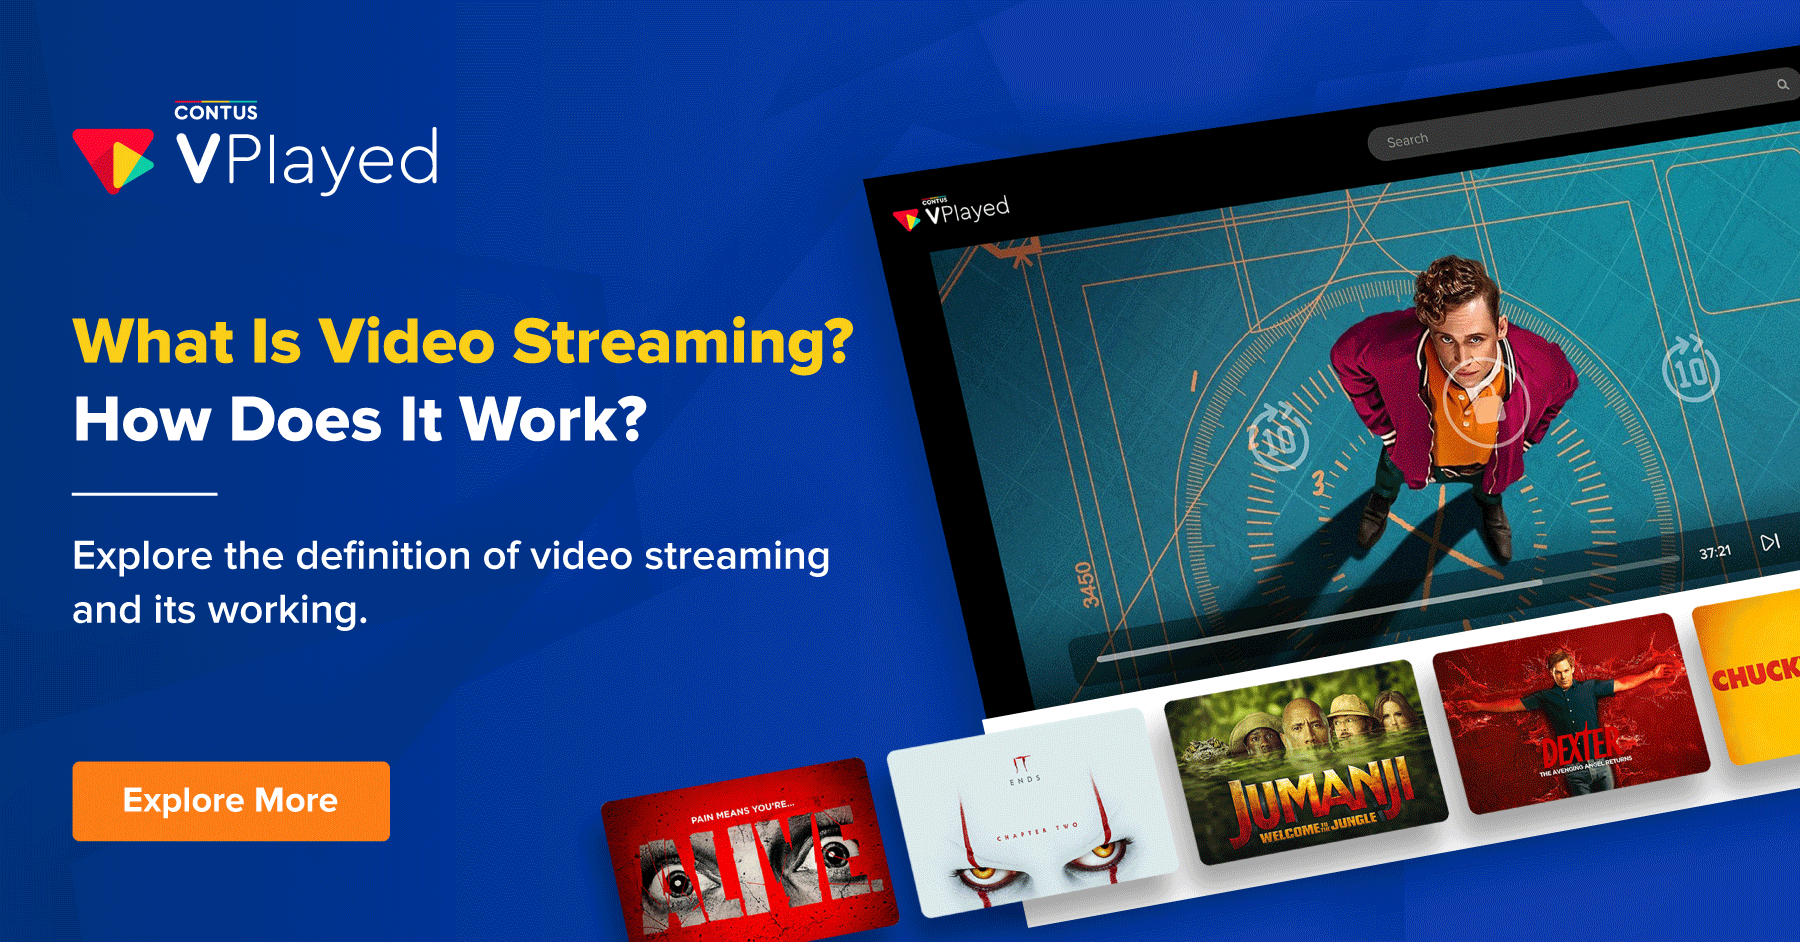 Video Streaming Definition, Meaning and How Does It Work?